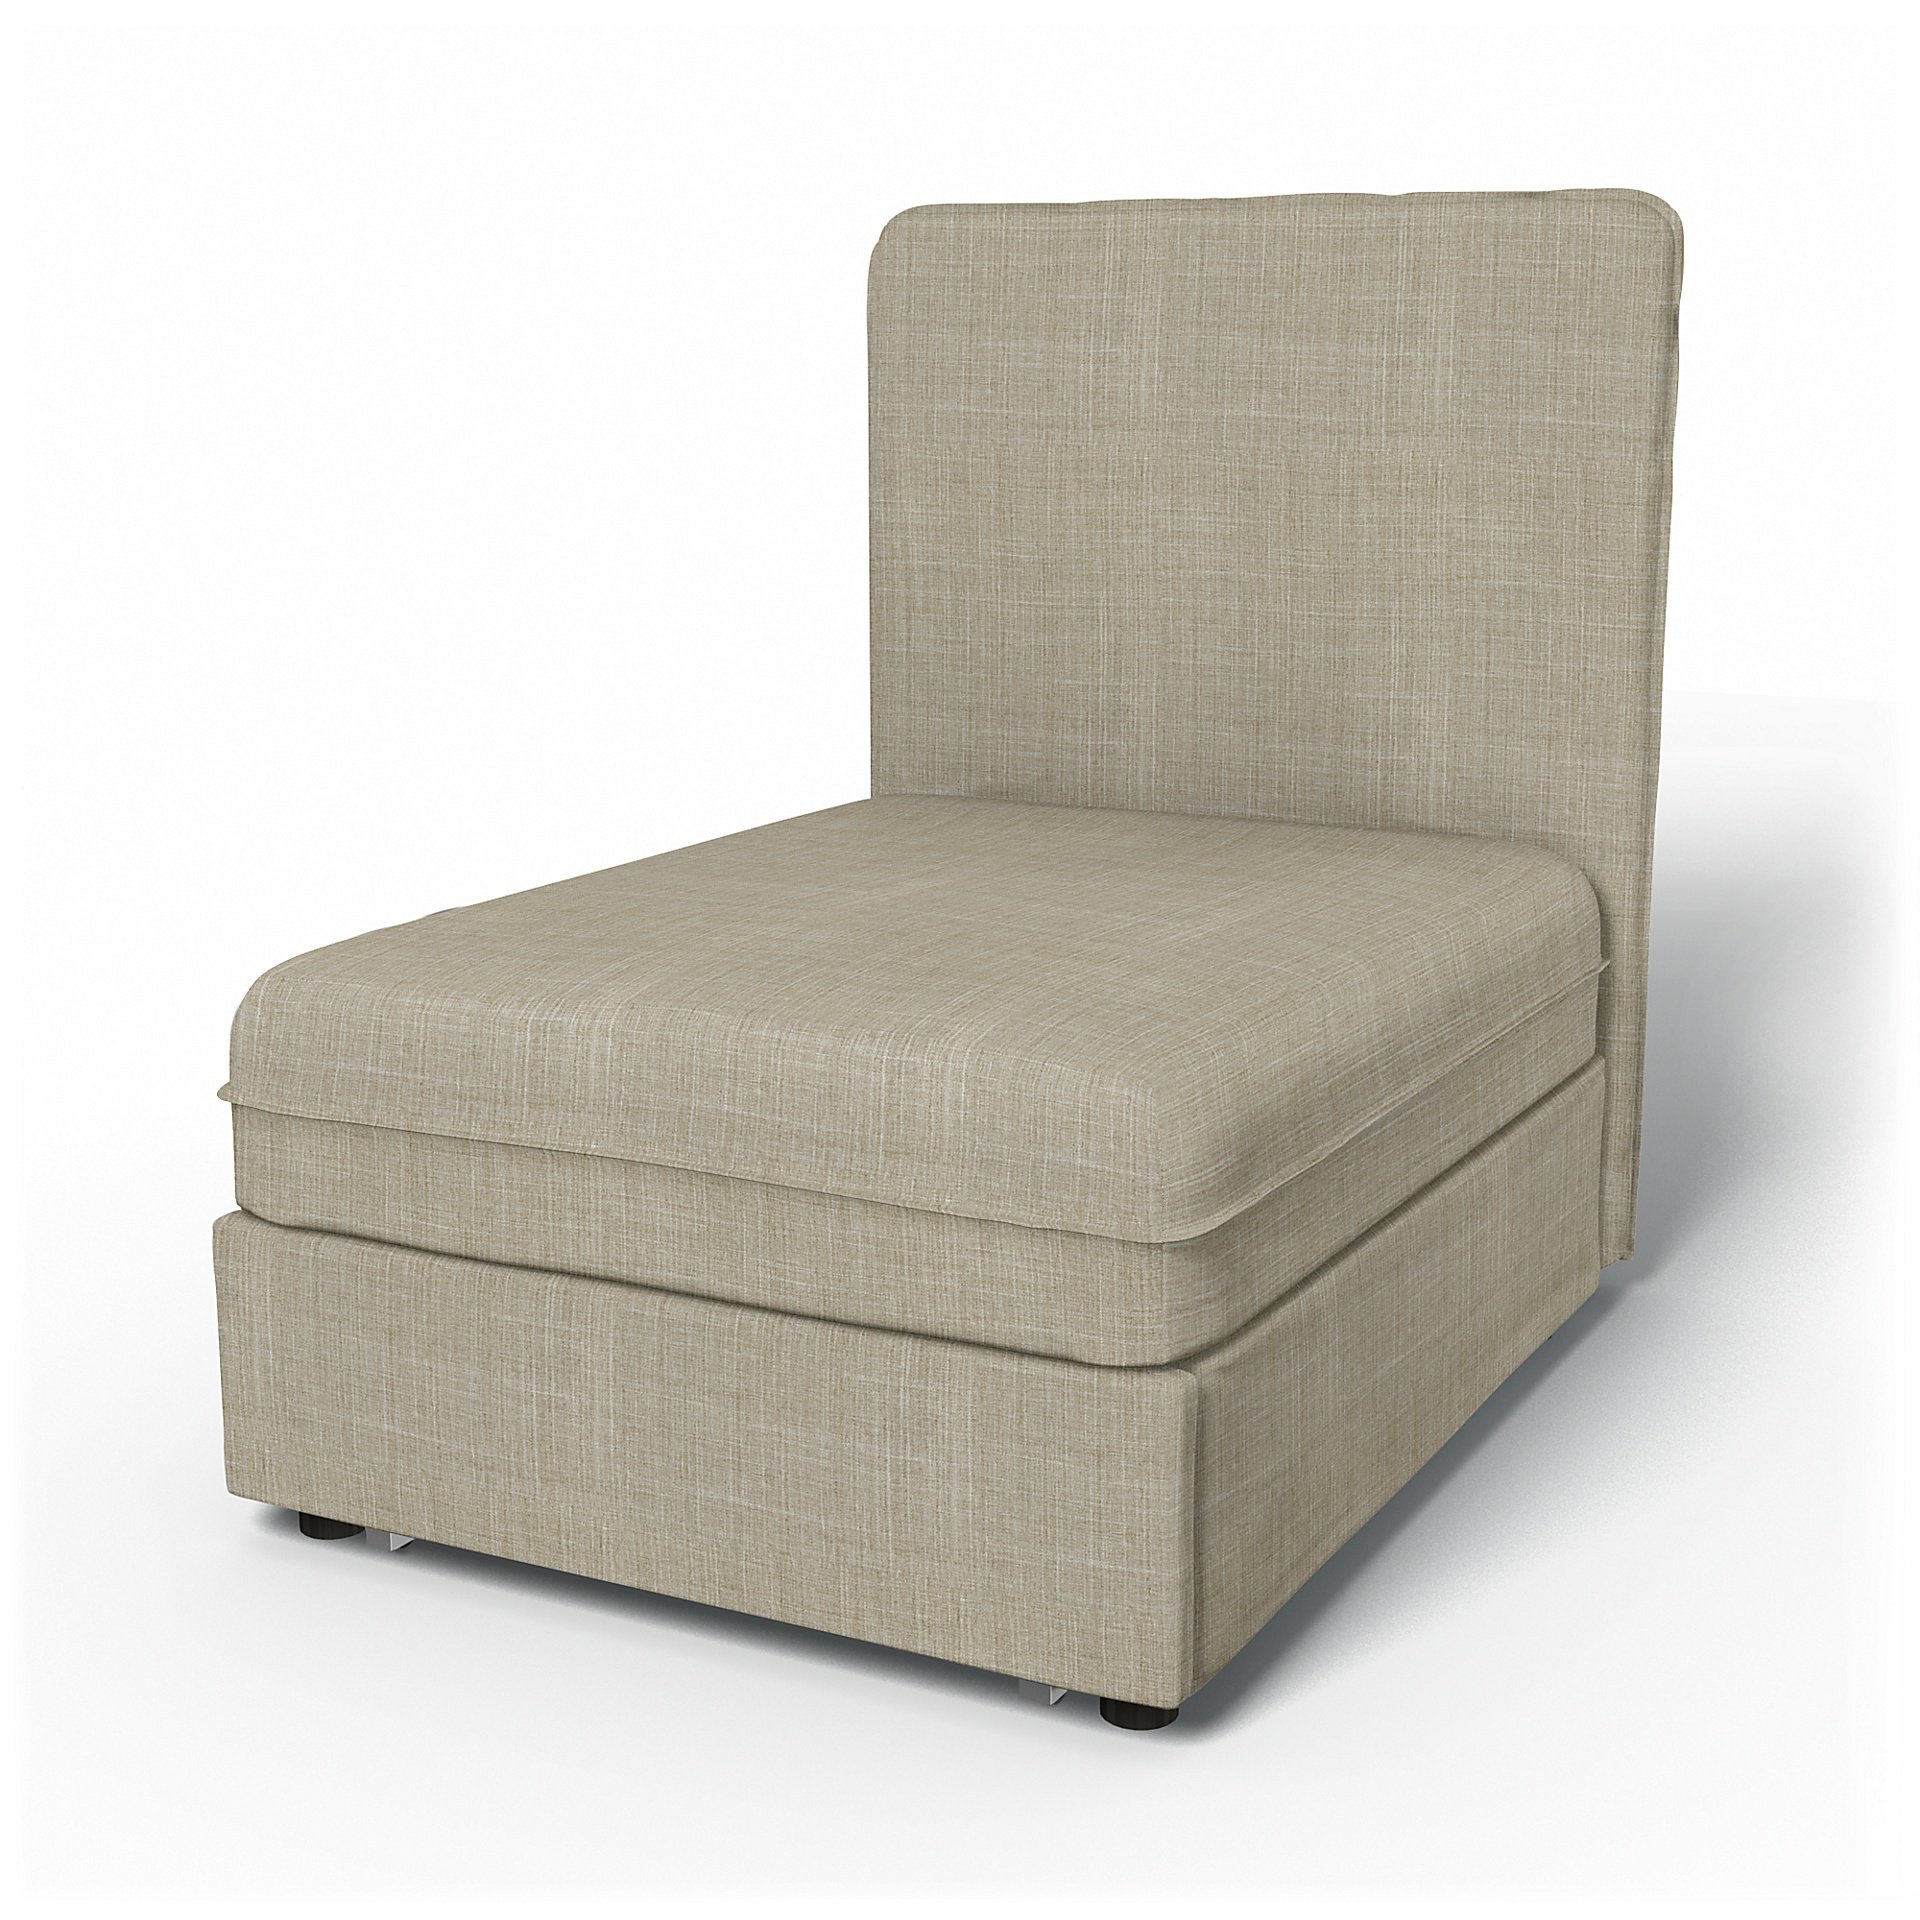 IKEA - Vallentuna Seat Module with High Back Sofa Bed Cover (80x100x46cm), Sand Beige, Boucle & Text